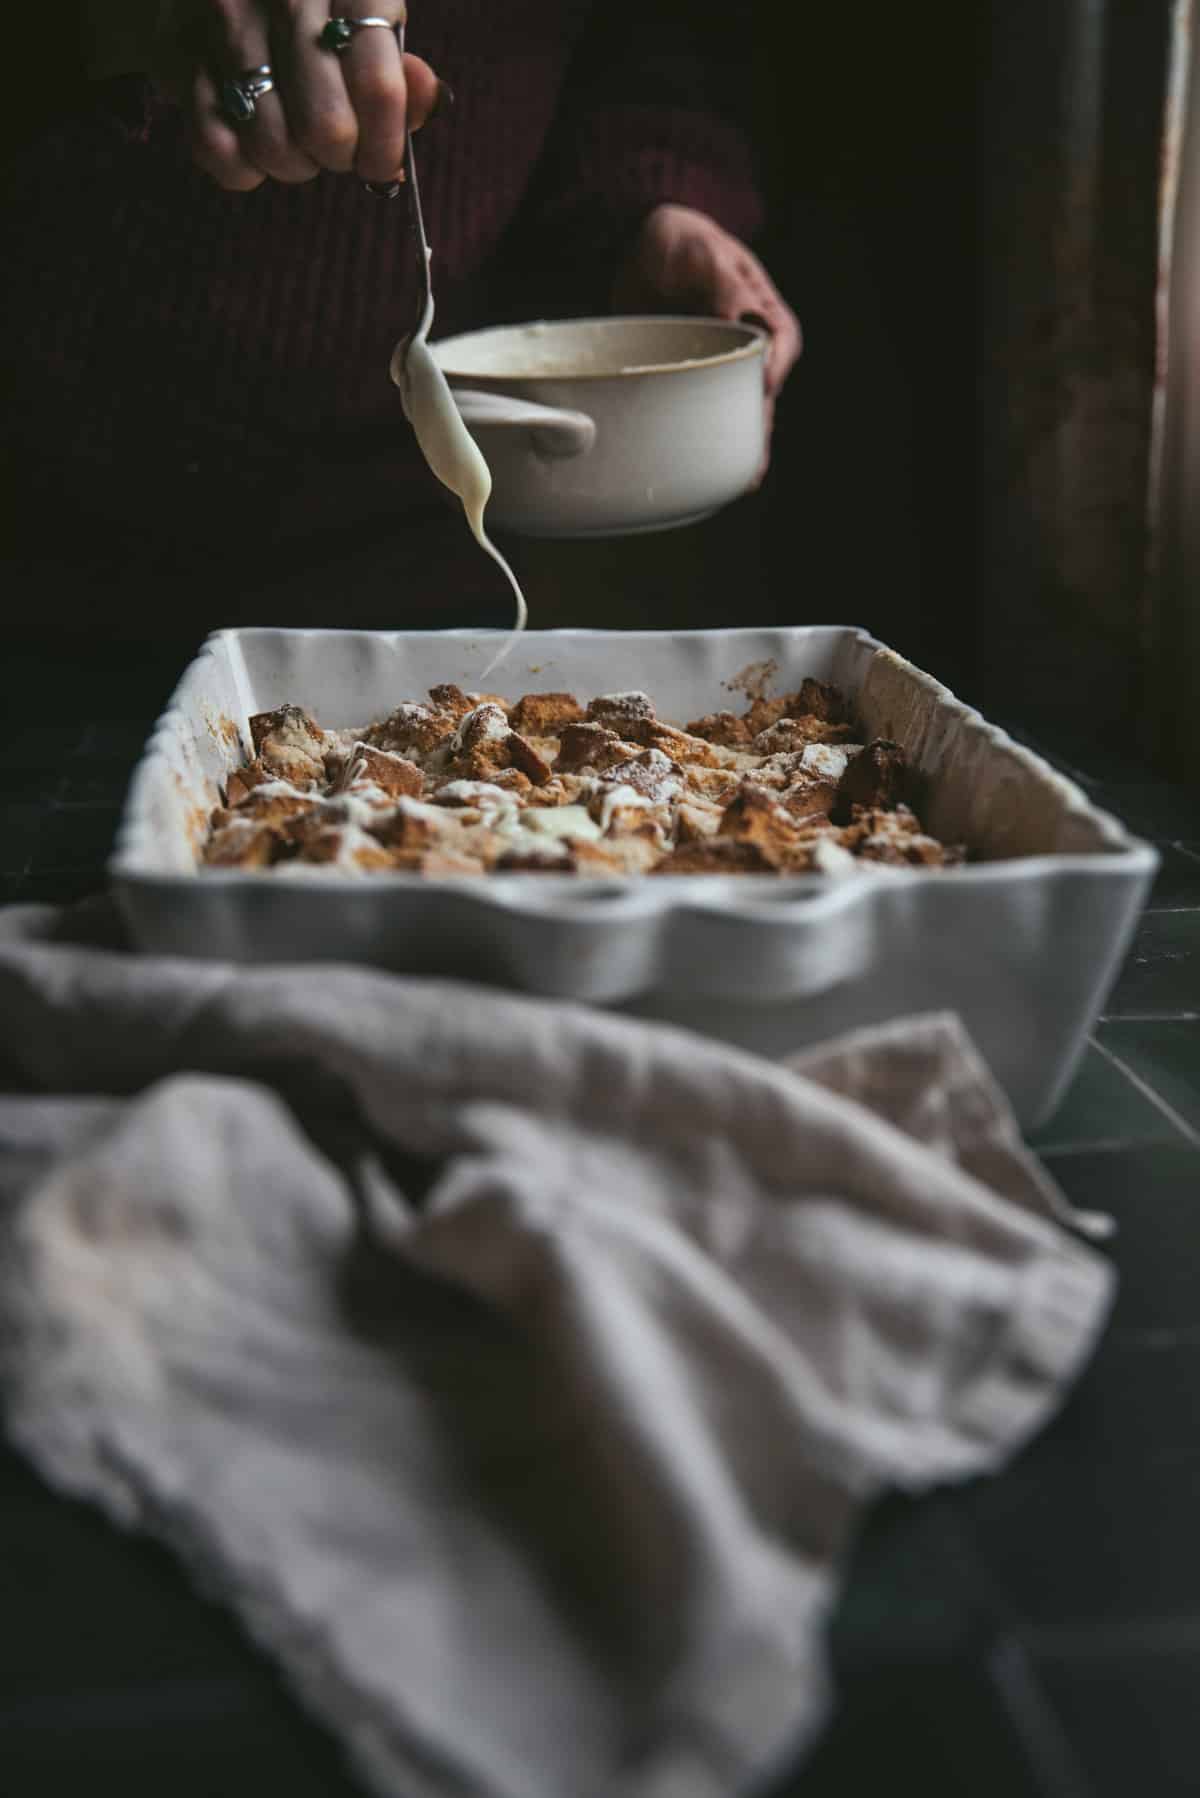 Spoon drizzling glaze over baked french toast in a white baking dish.  In the foreground is a tan linen napkin.